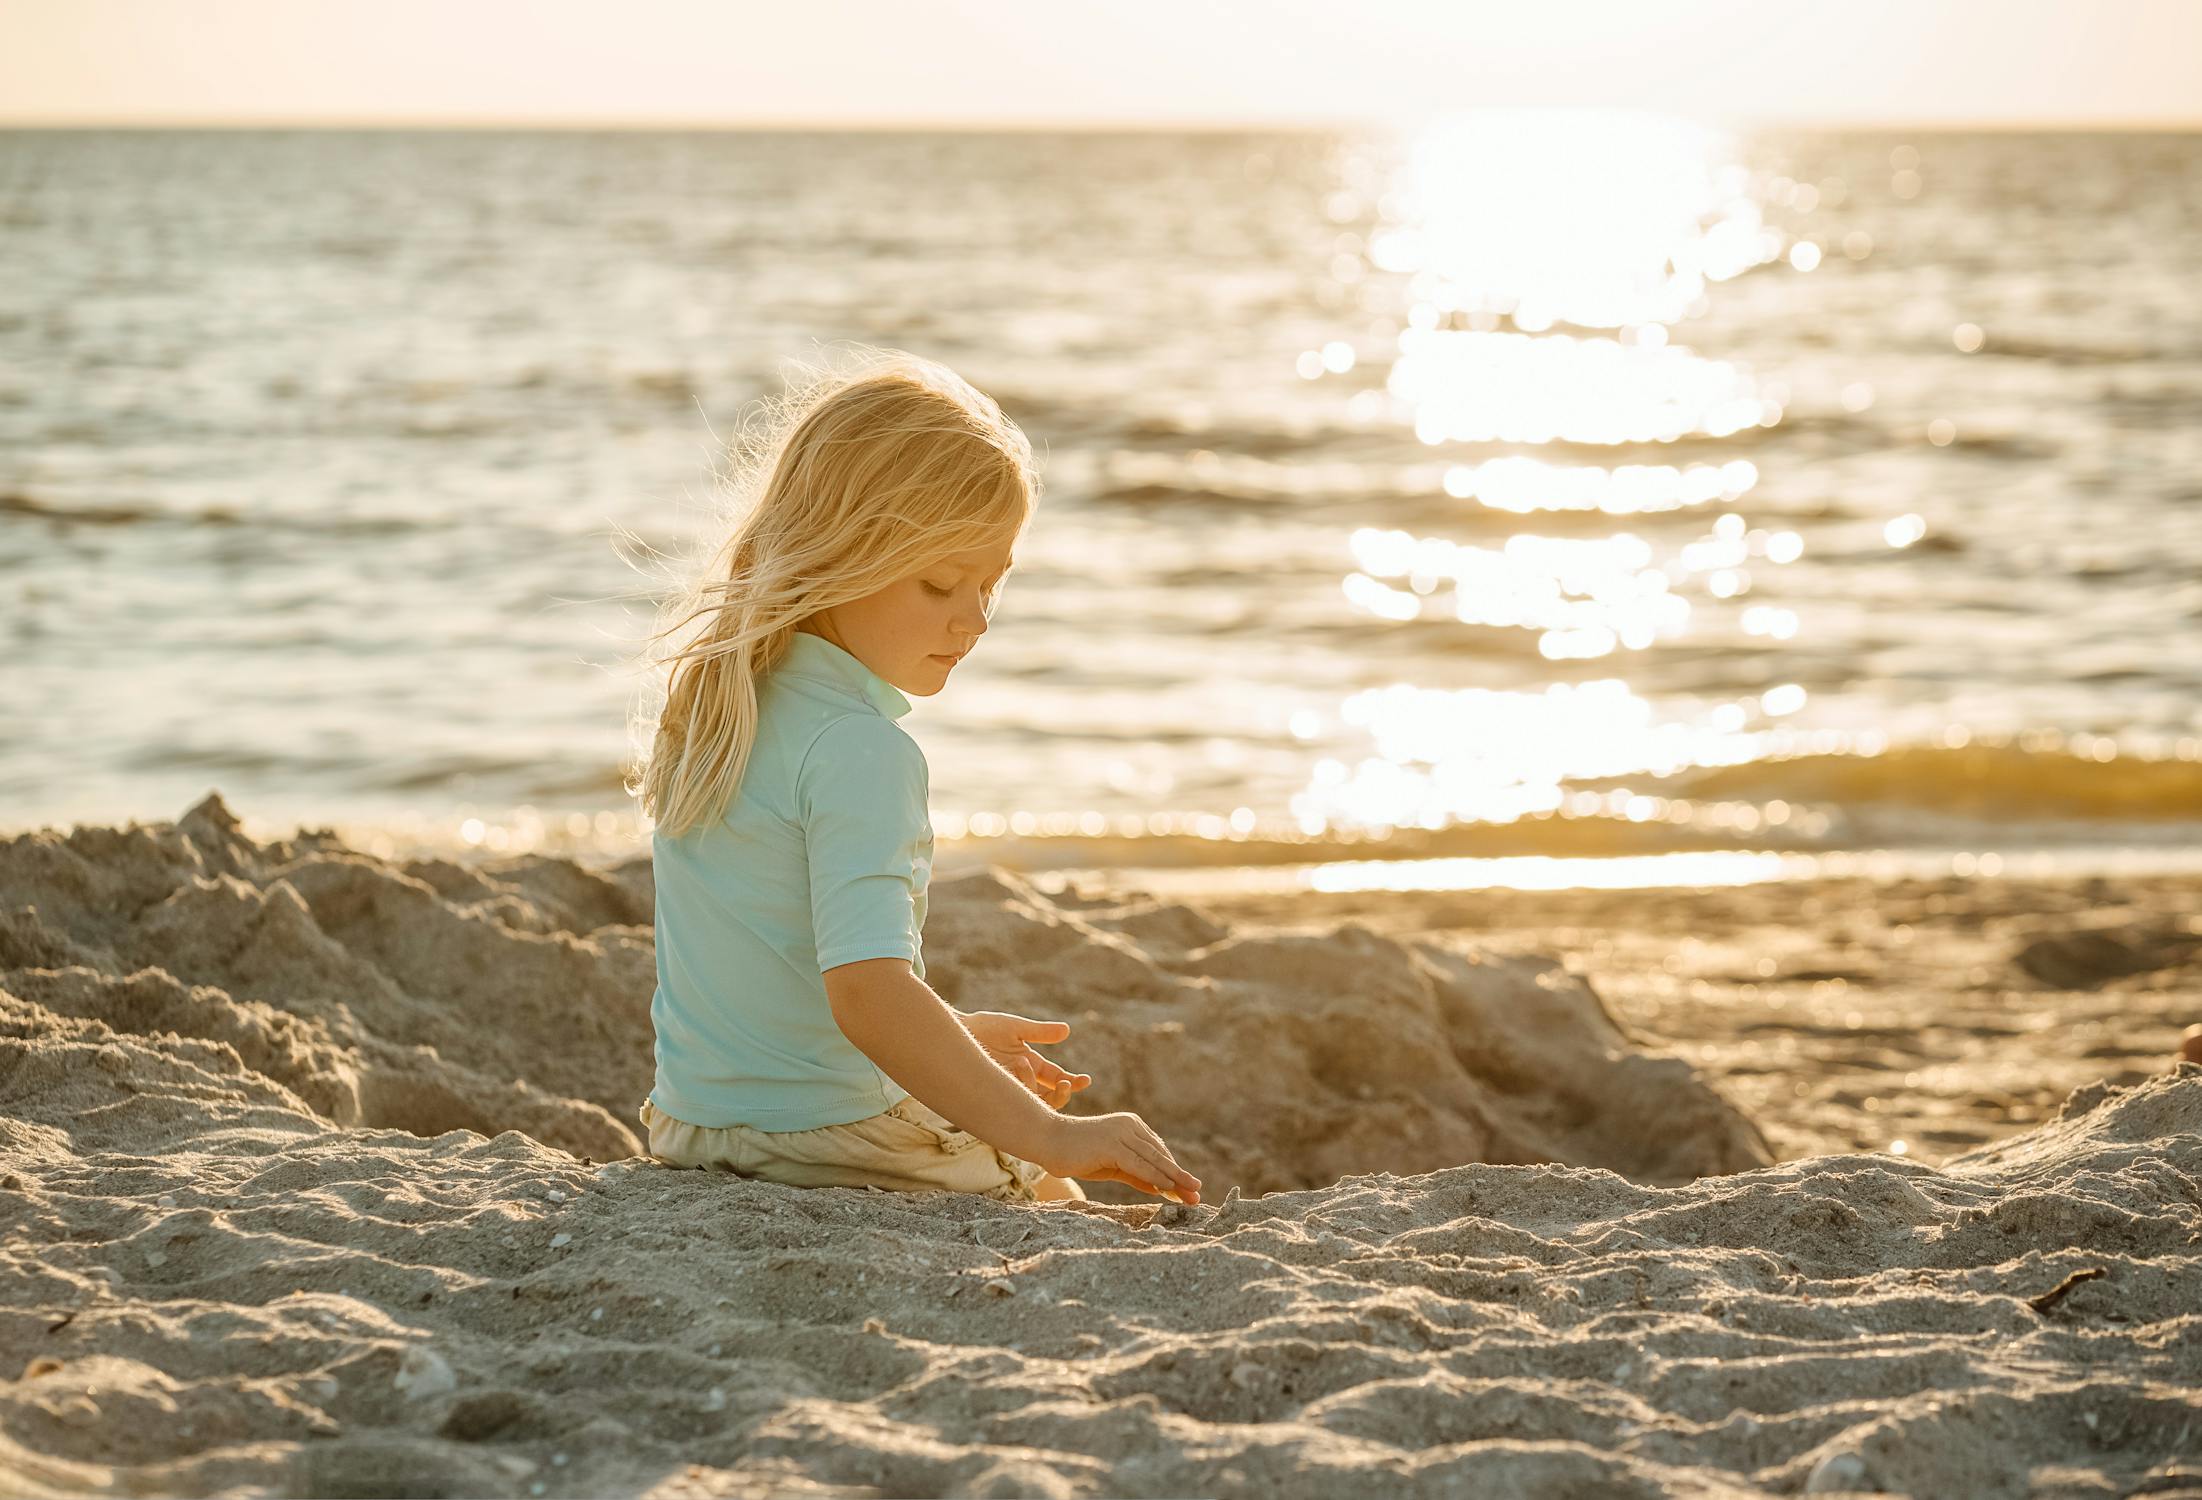 Summer Photo by Olya Harytovich from Pexels: https://www.pexels.com/photo/blond-girl-sitting-on-a-sandy-beach-and-sun-reflecting-in-the-sea-16401259/